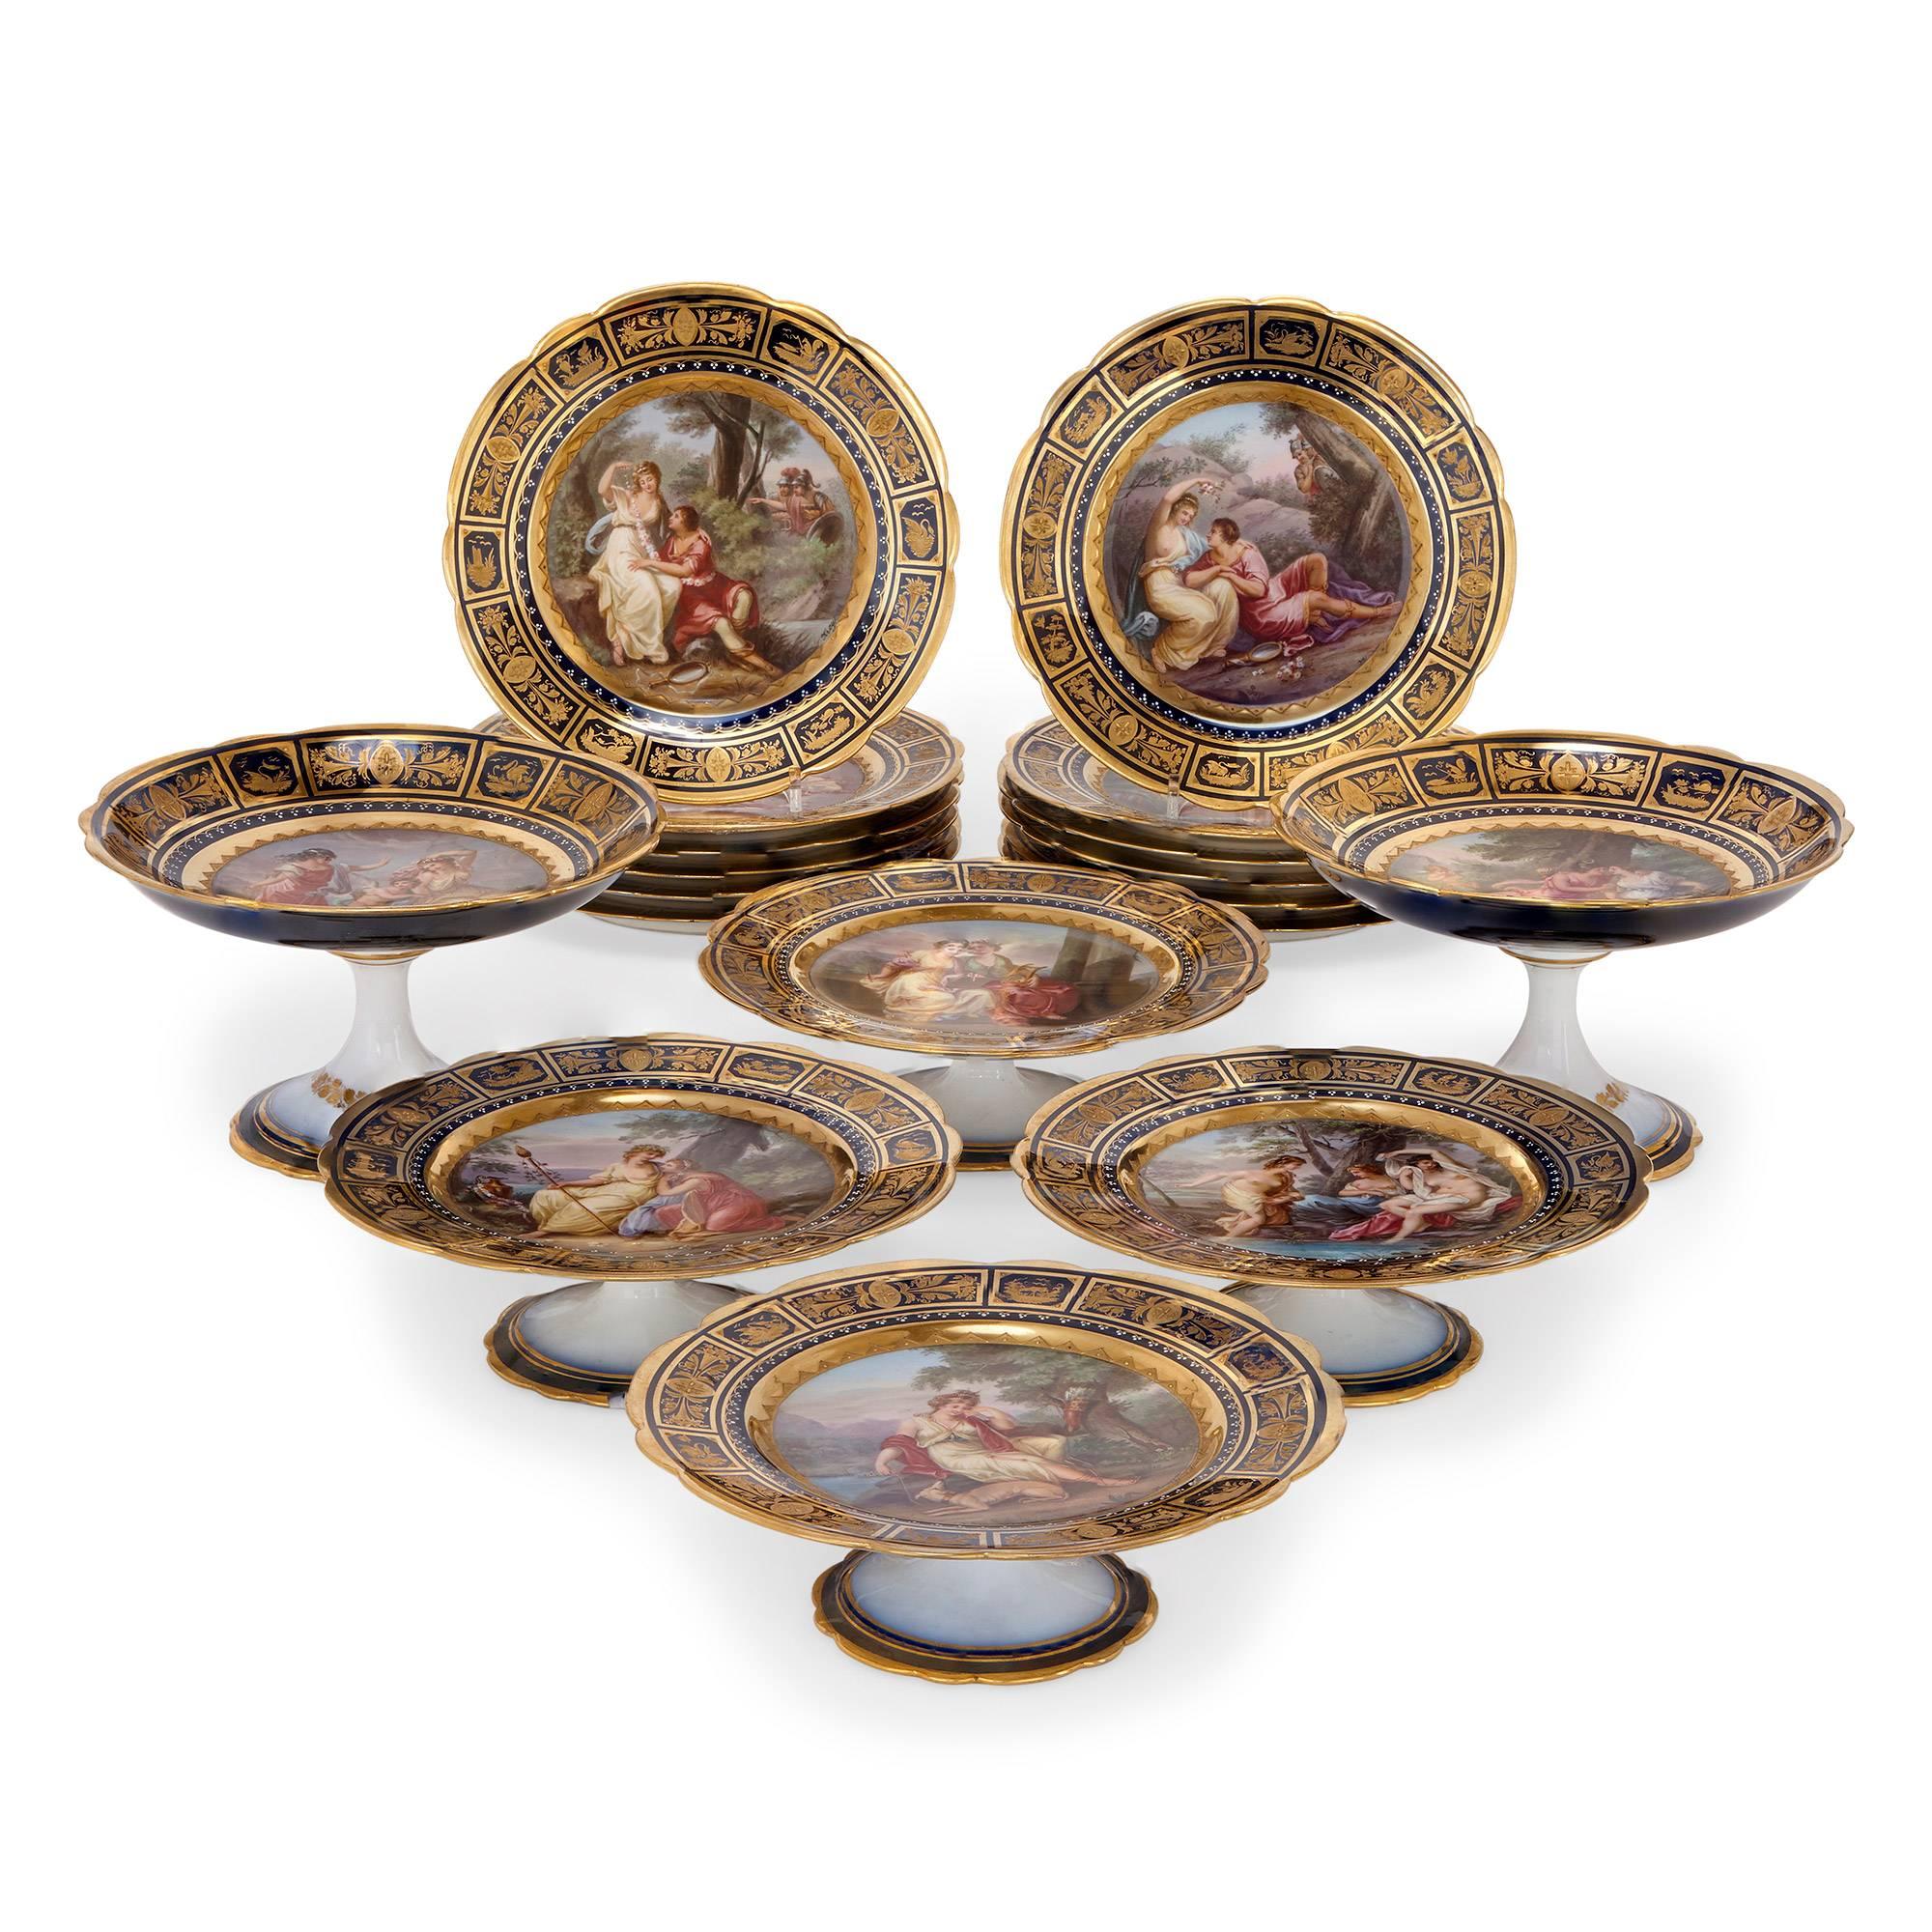 Comprising 12 dessert plates, four low tazzas and two high tazzas, painted with mythological armorous scenes by Kreyser, with a richly gilt cobalt blue border, with beehive mark.
Measures: Plates diameter 23cm, low tazzas height 8cm, high tazzas